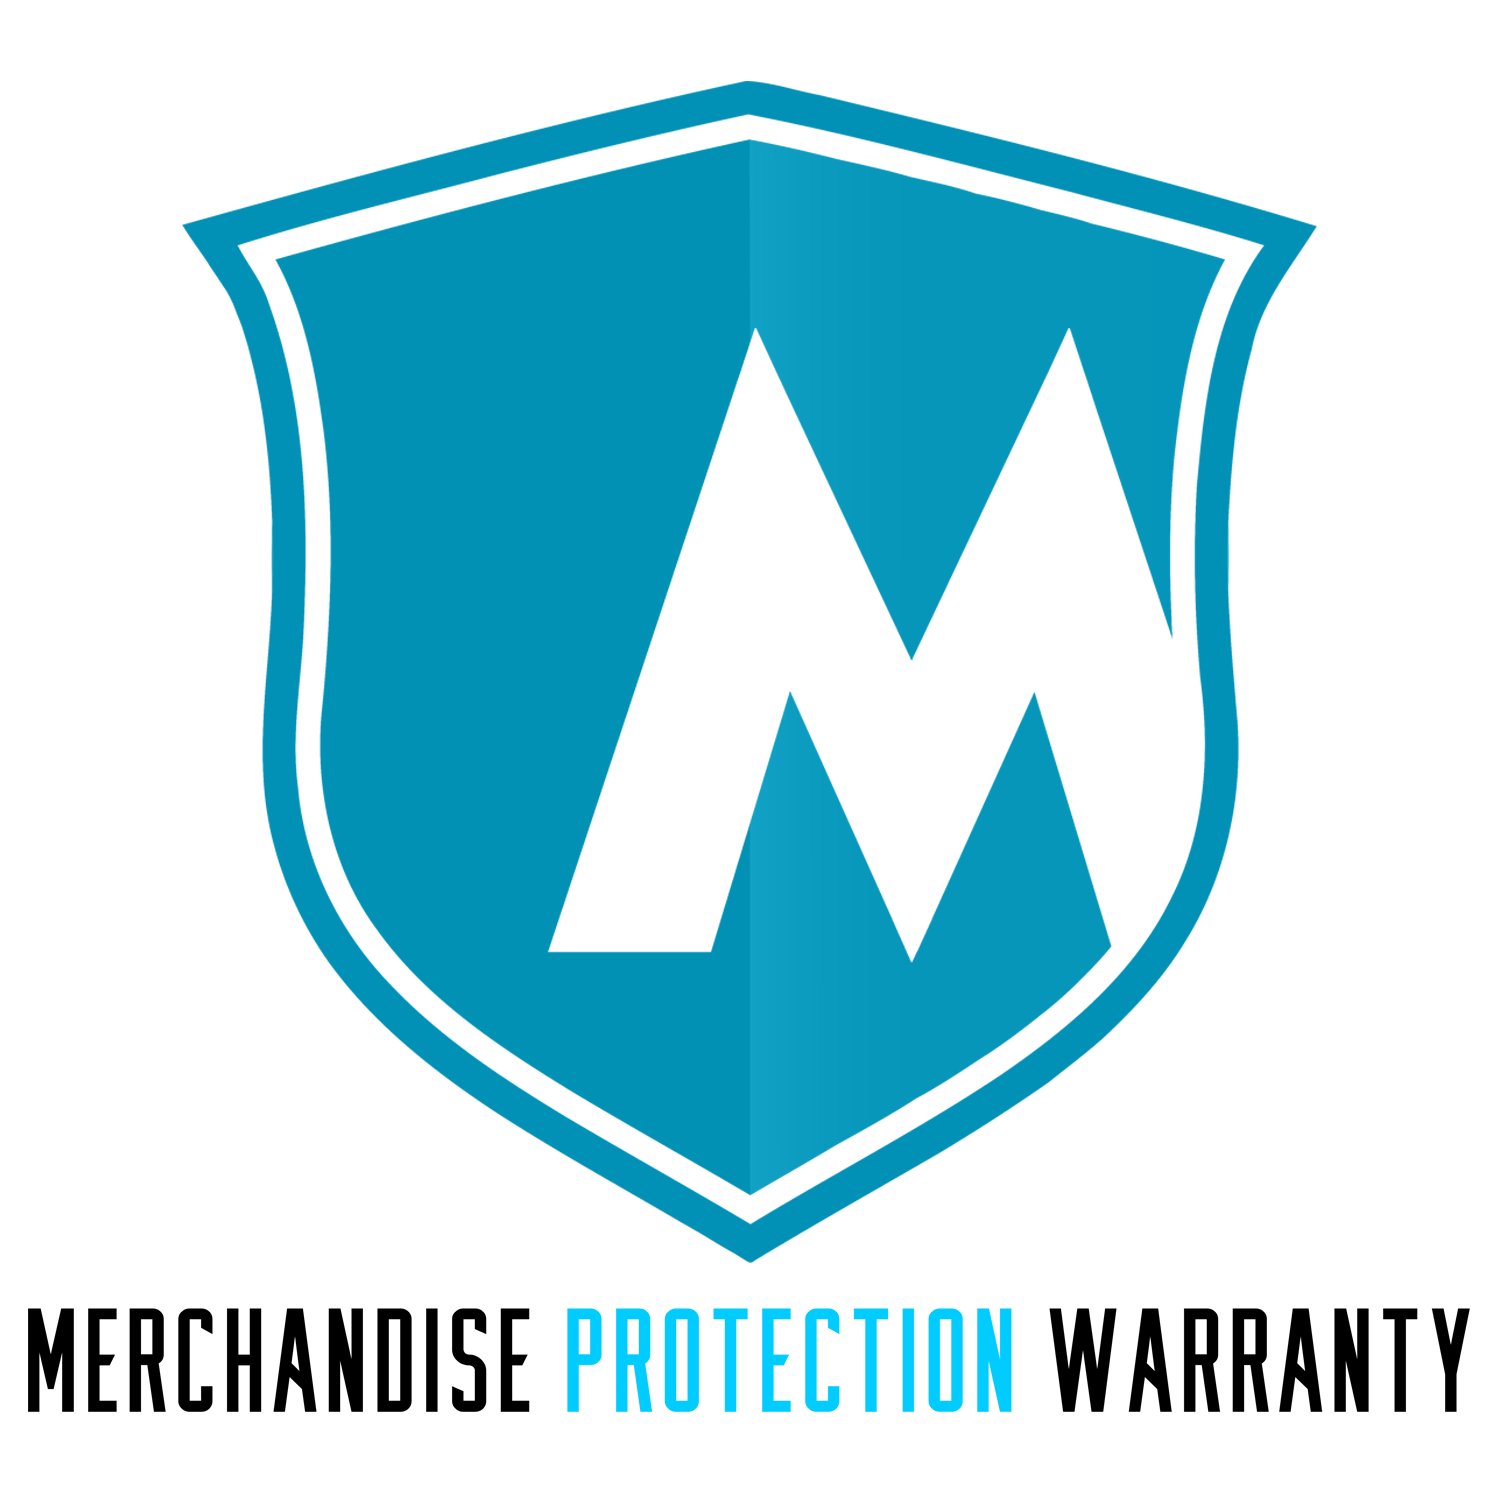 2 Year Merchandise Protection Warranty under $2000 (Accidental, Prepaid Shipping)